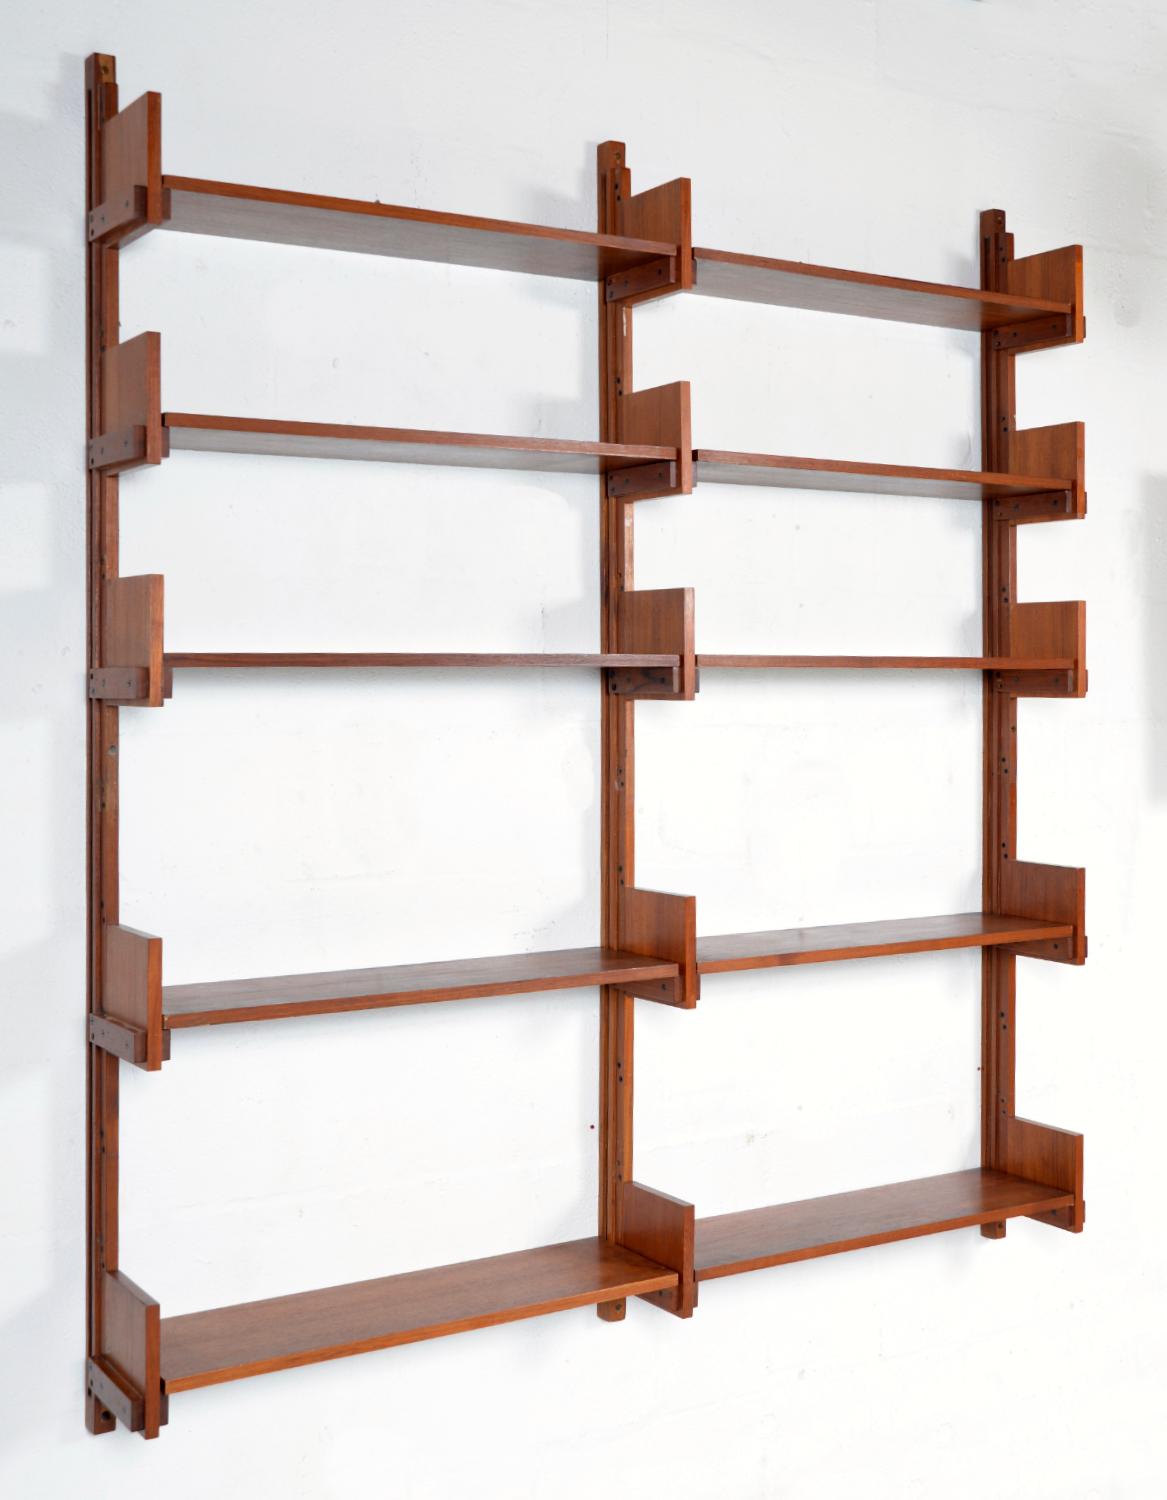 A very stylish 1950s Italian shelving system, which has a Brutalist look, similar in style to pieces produced in Pierre Chapo's workshop. This robust and solid shelving system or bookcase, consists of ten adjustable teak shelves that rest on teak